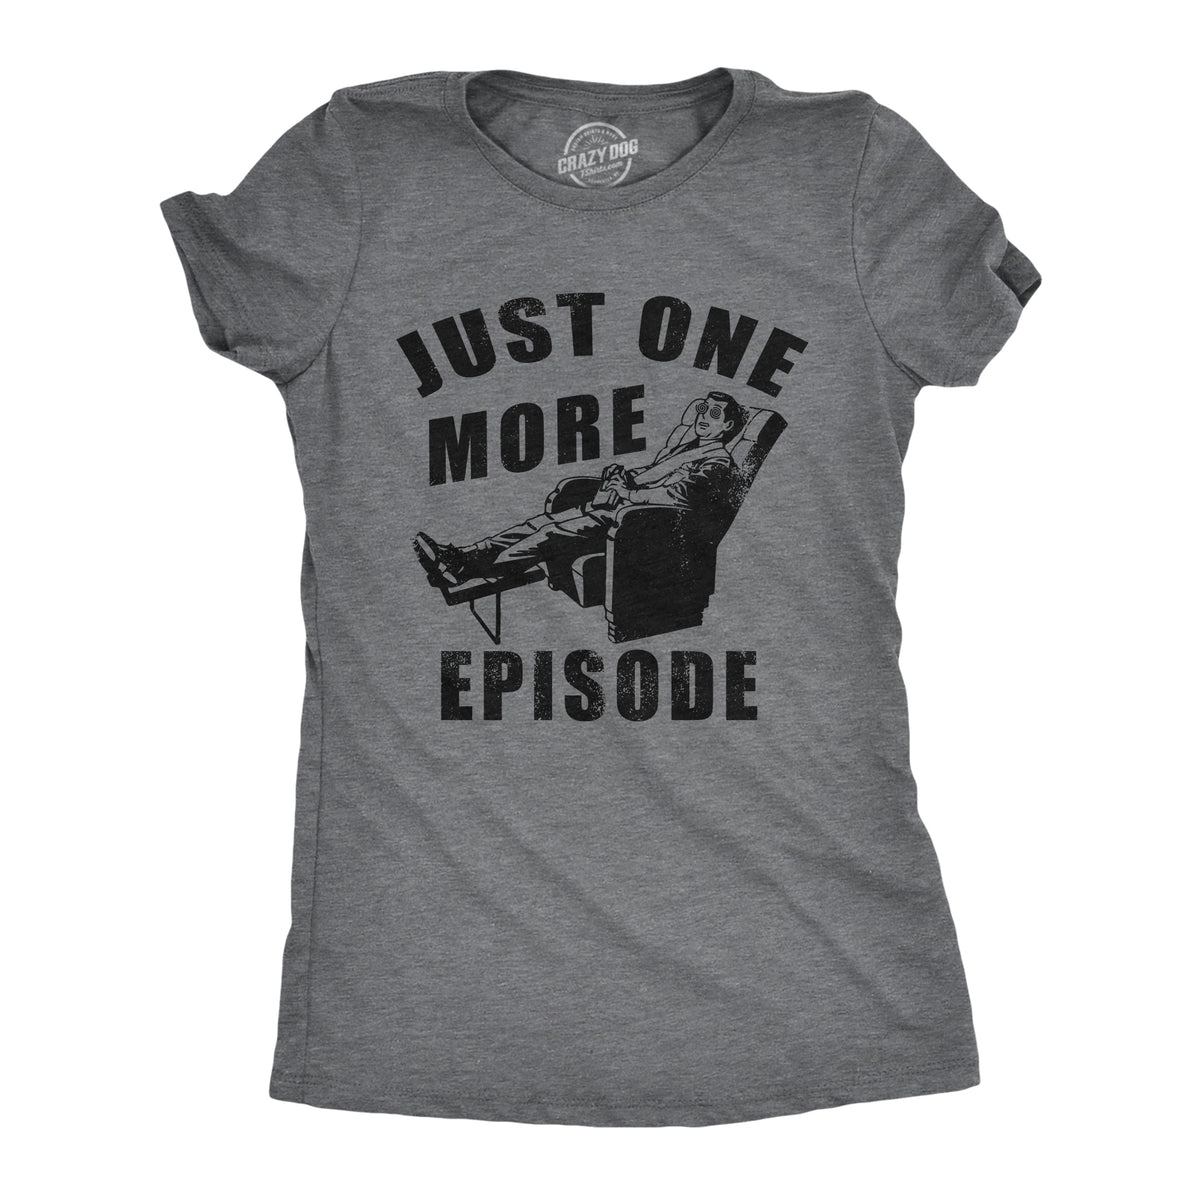 Funny Dark Heather Grey - EPISODE Just One More Episode Womens T Shirt Nerdy TV &amp; Movies sarcastic Tee